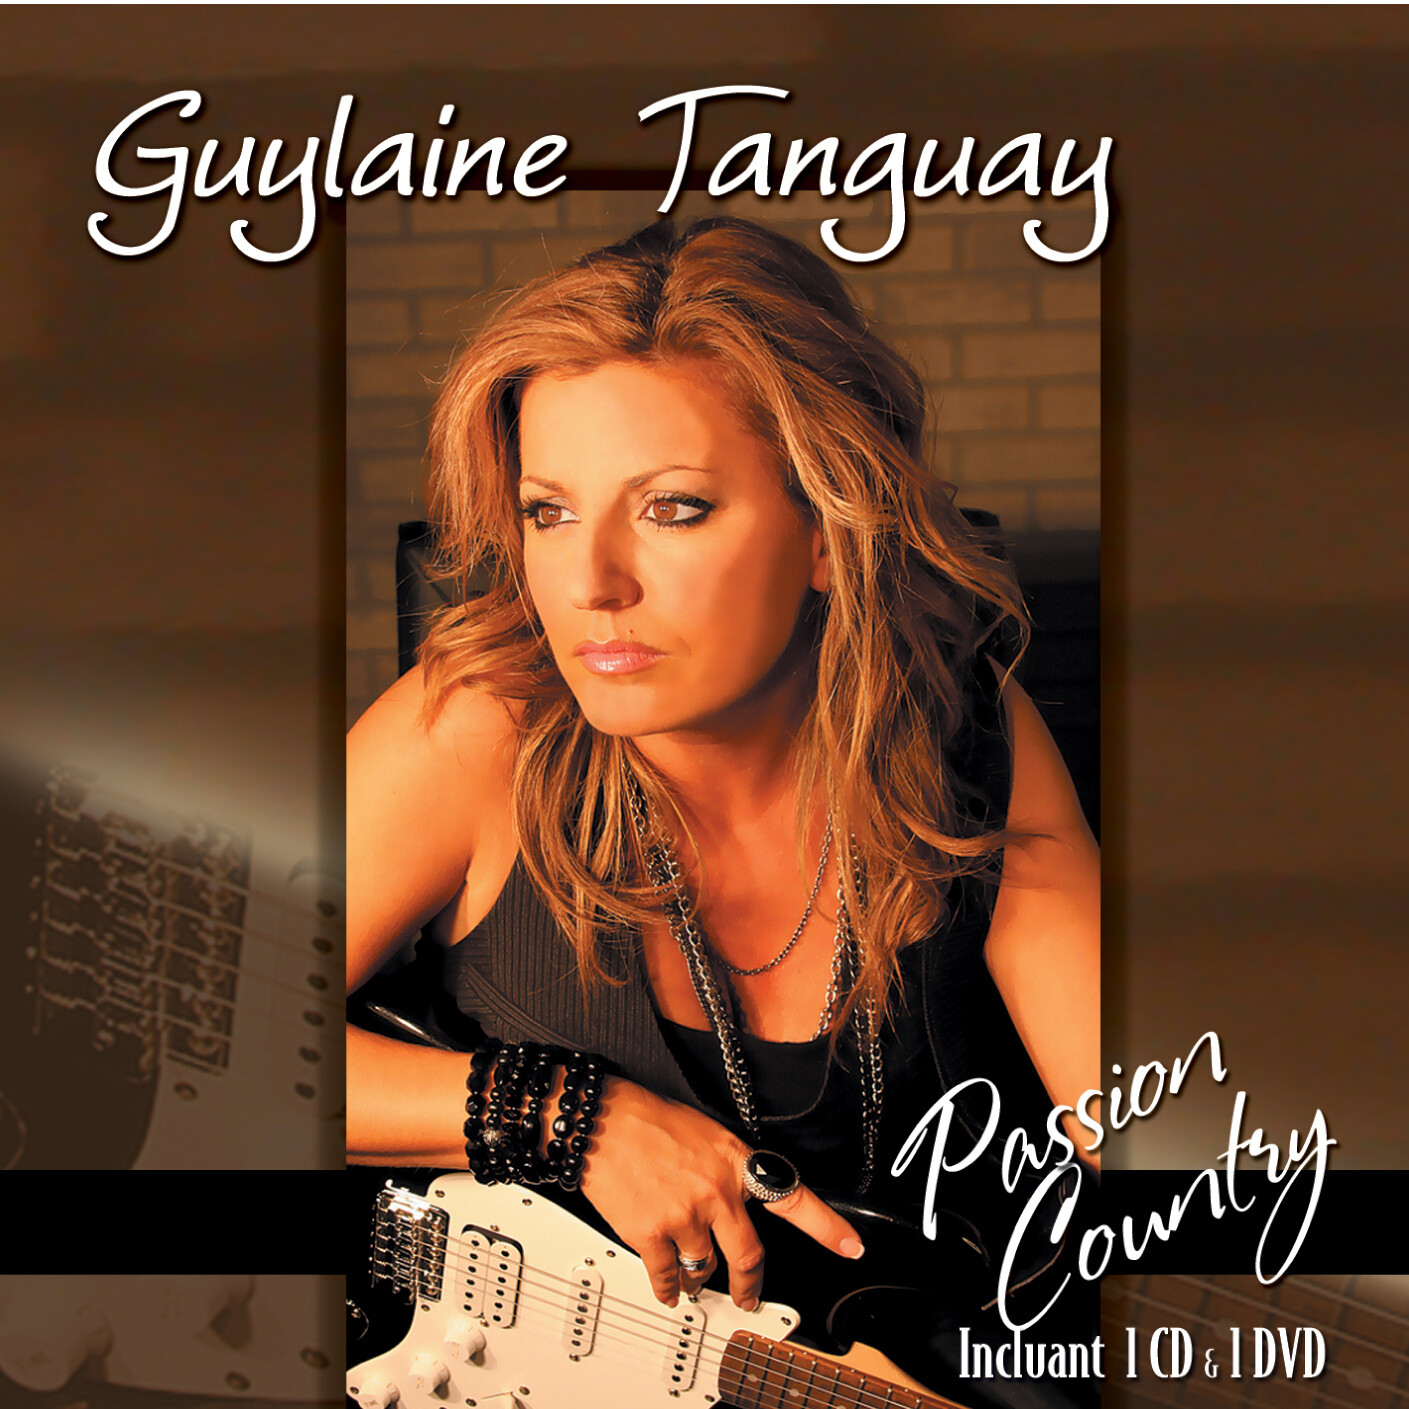 1 CD + 1 DVD Guylaine Tanguay «Passion Country» - autographié